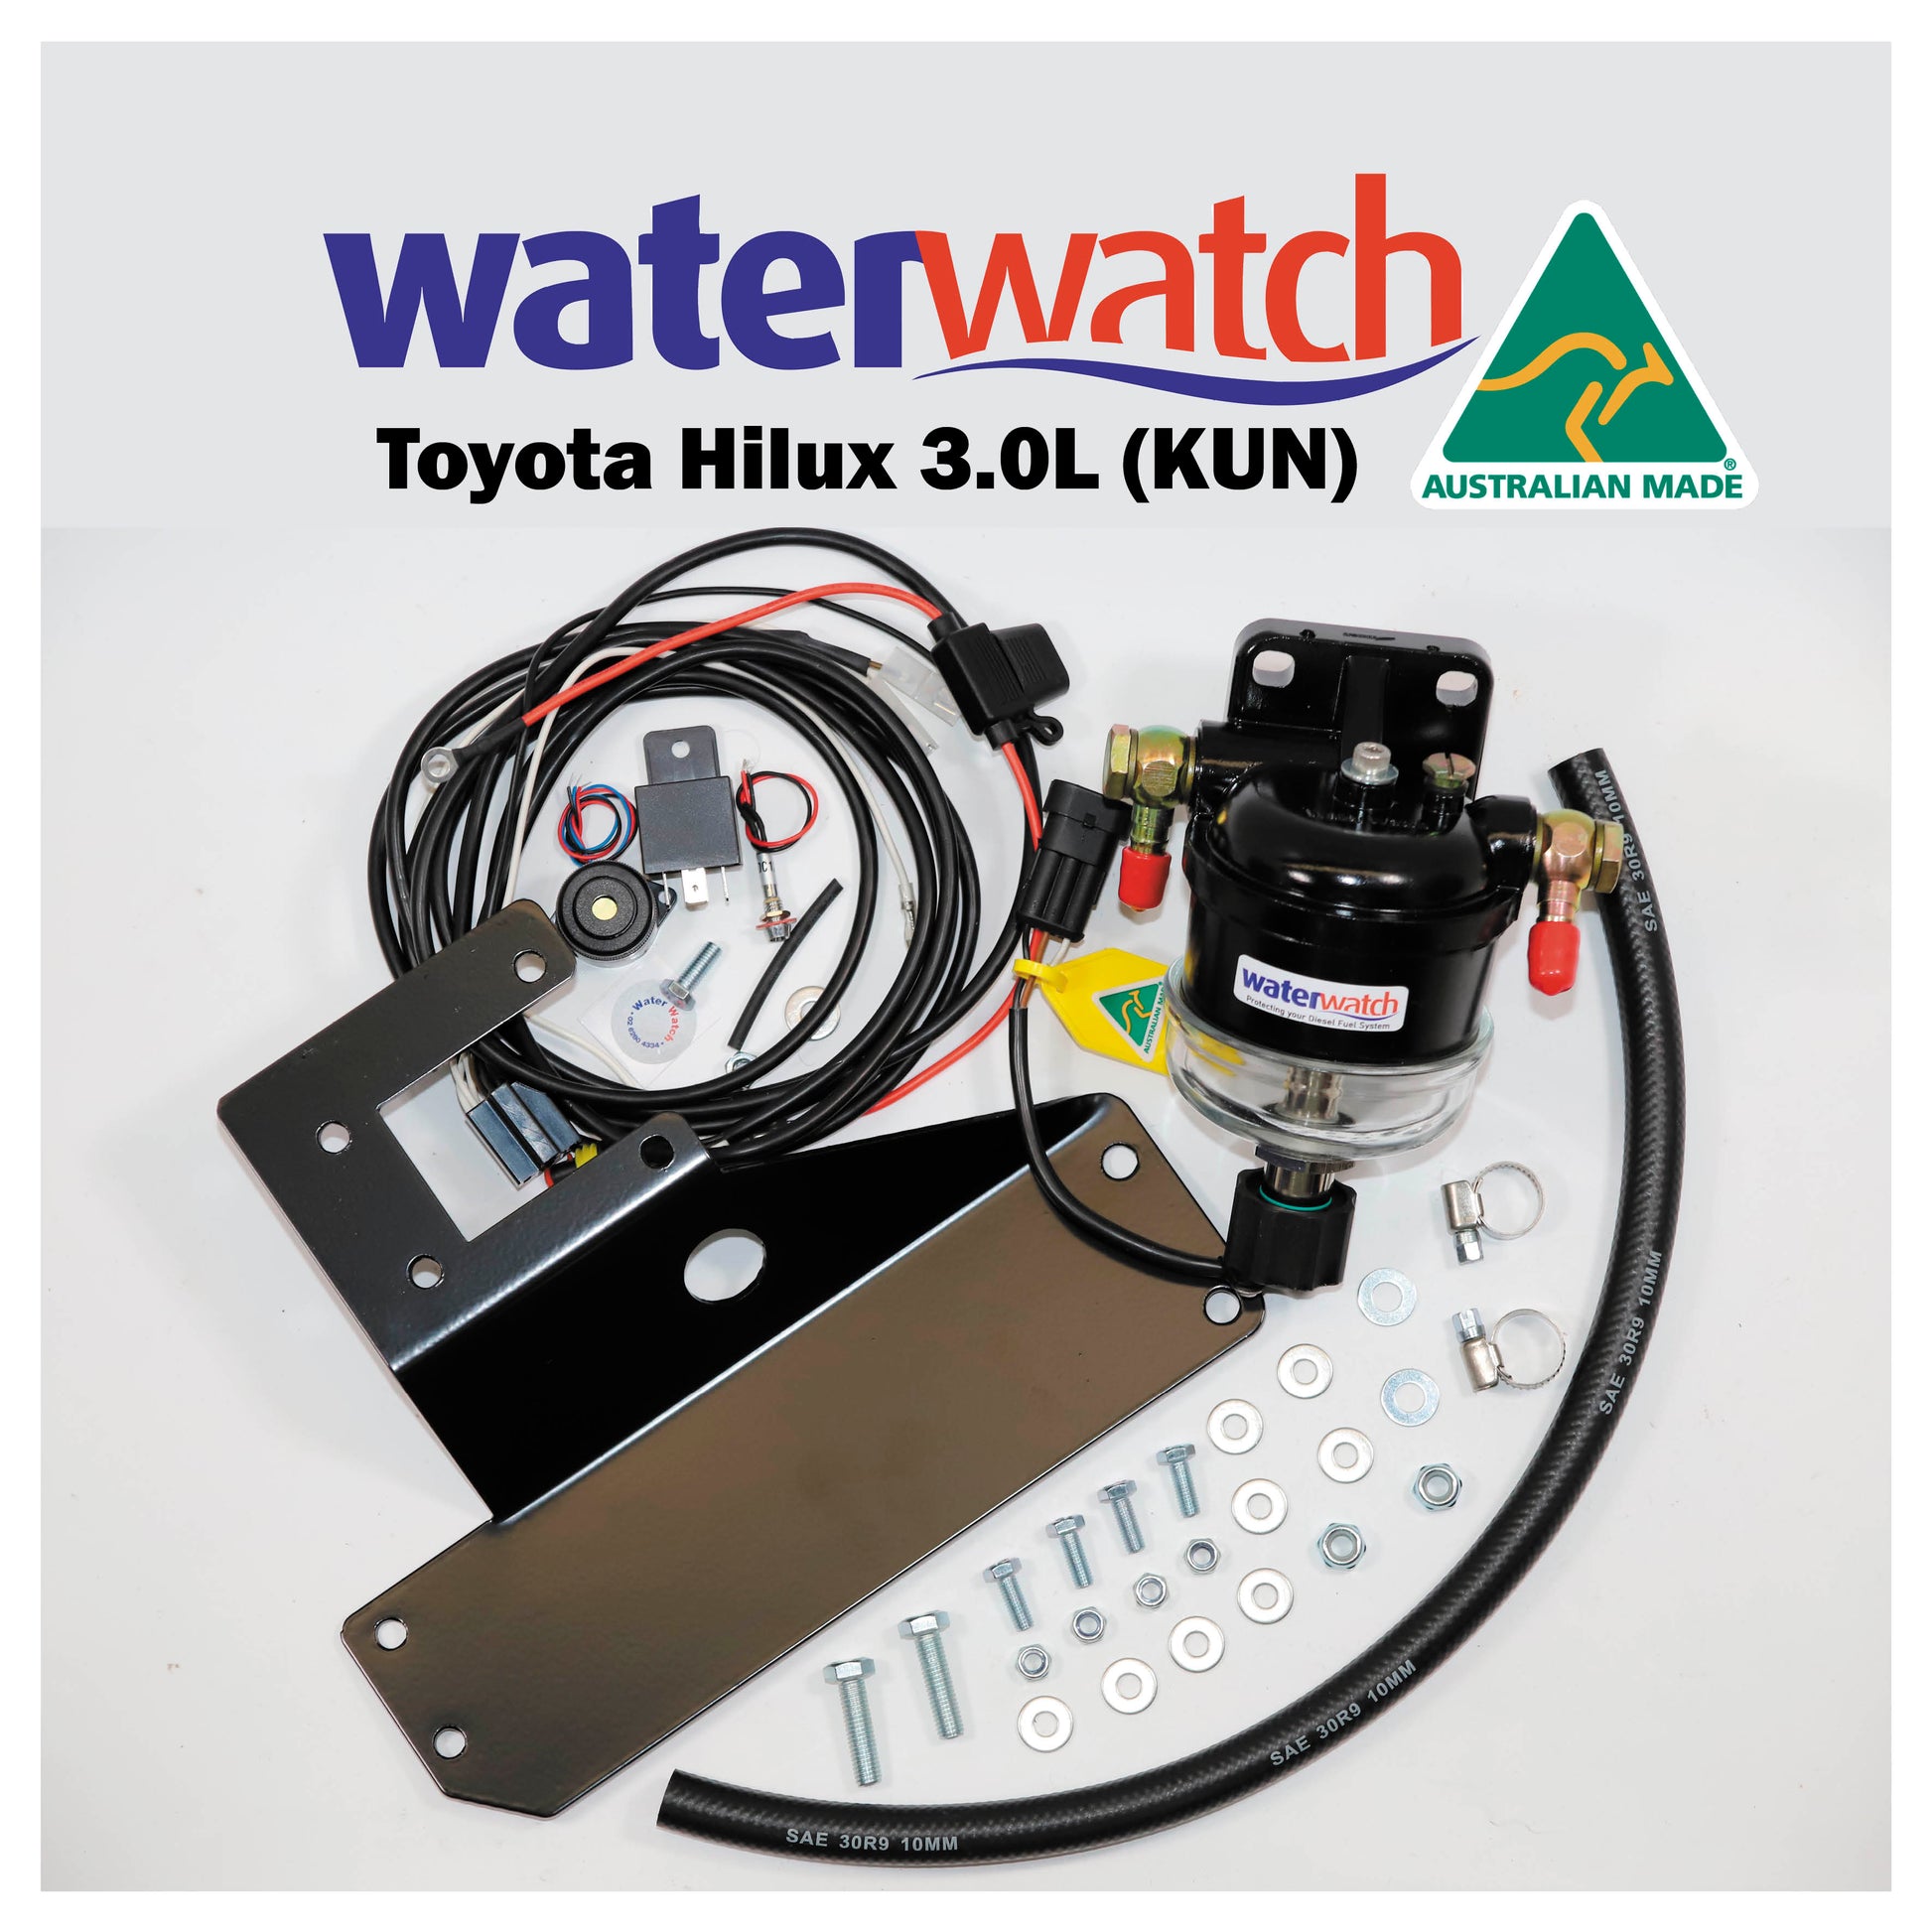 WATER WATCH for Diesel Toyota Hilux KUN 3L - 2005+ Pre-Filter protection against Diesel Fuel Contamination Damage - Specialist Tools Australia